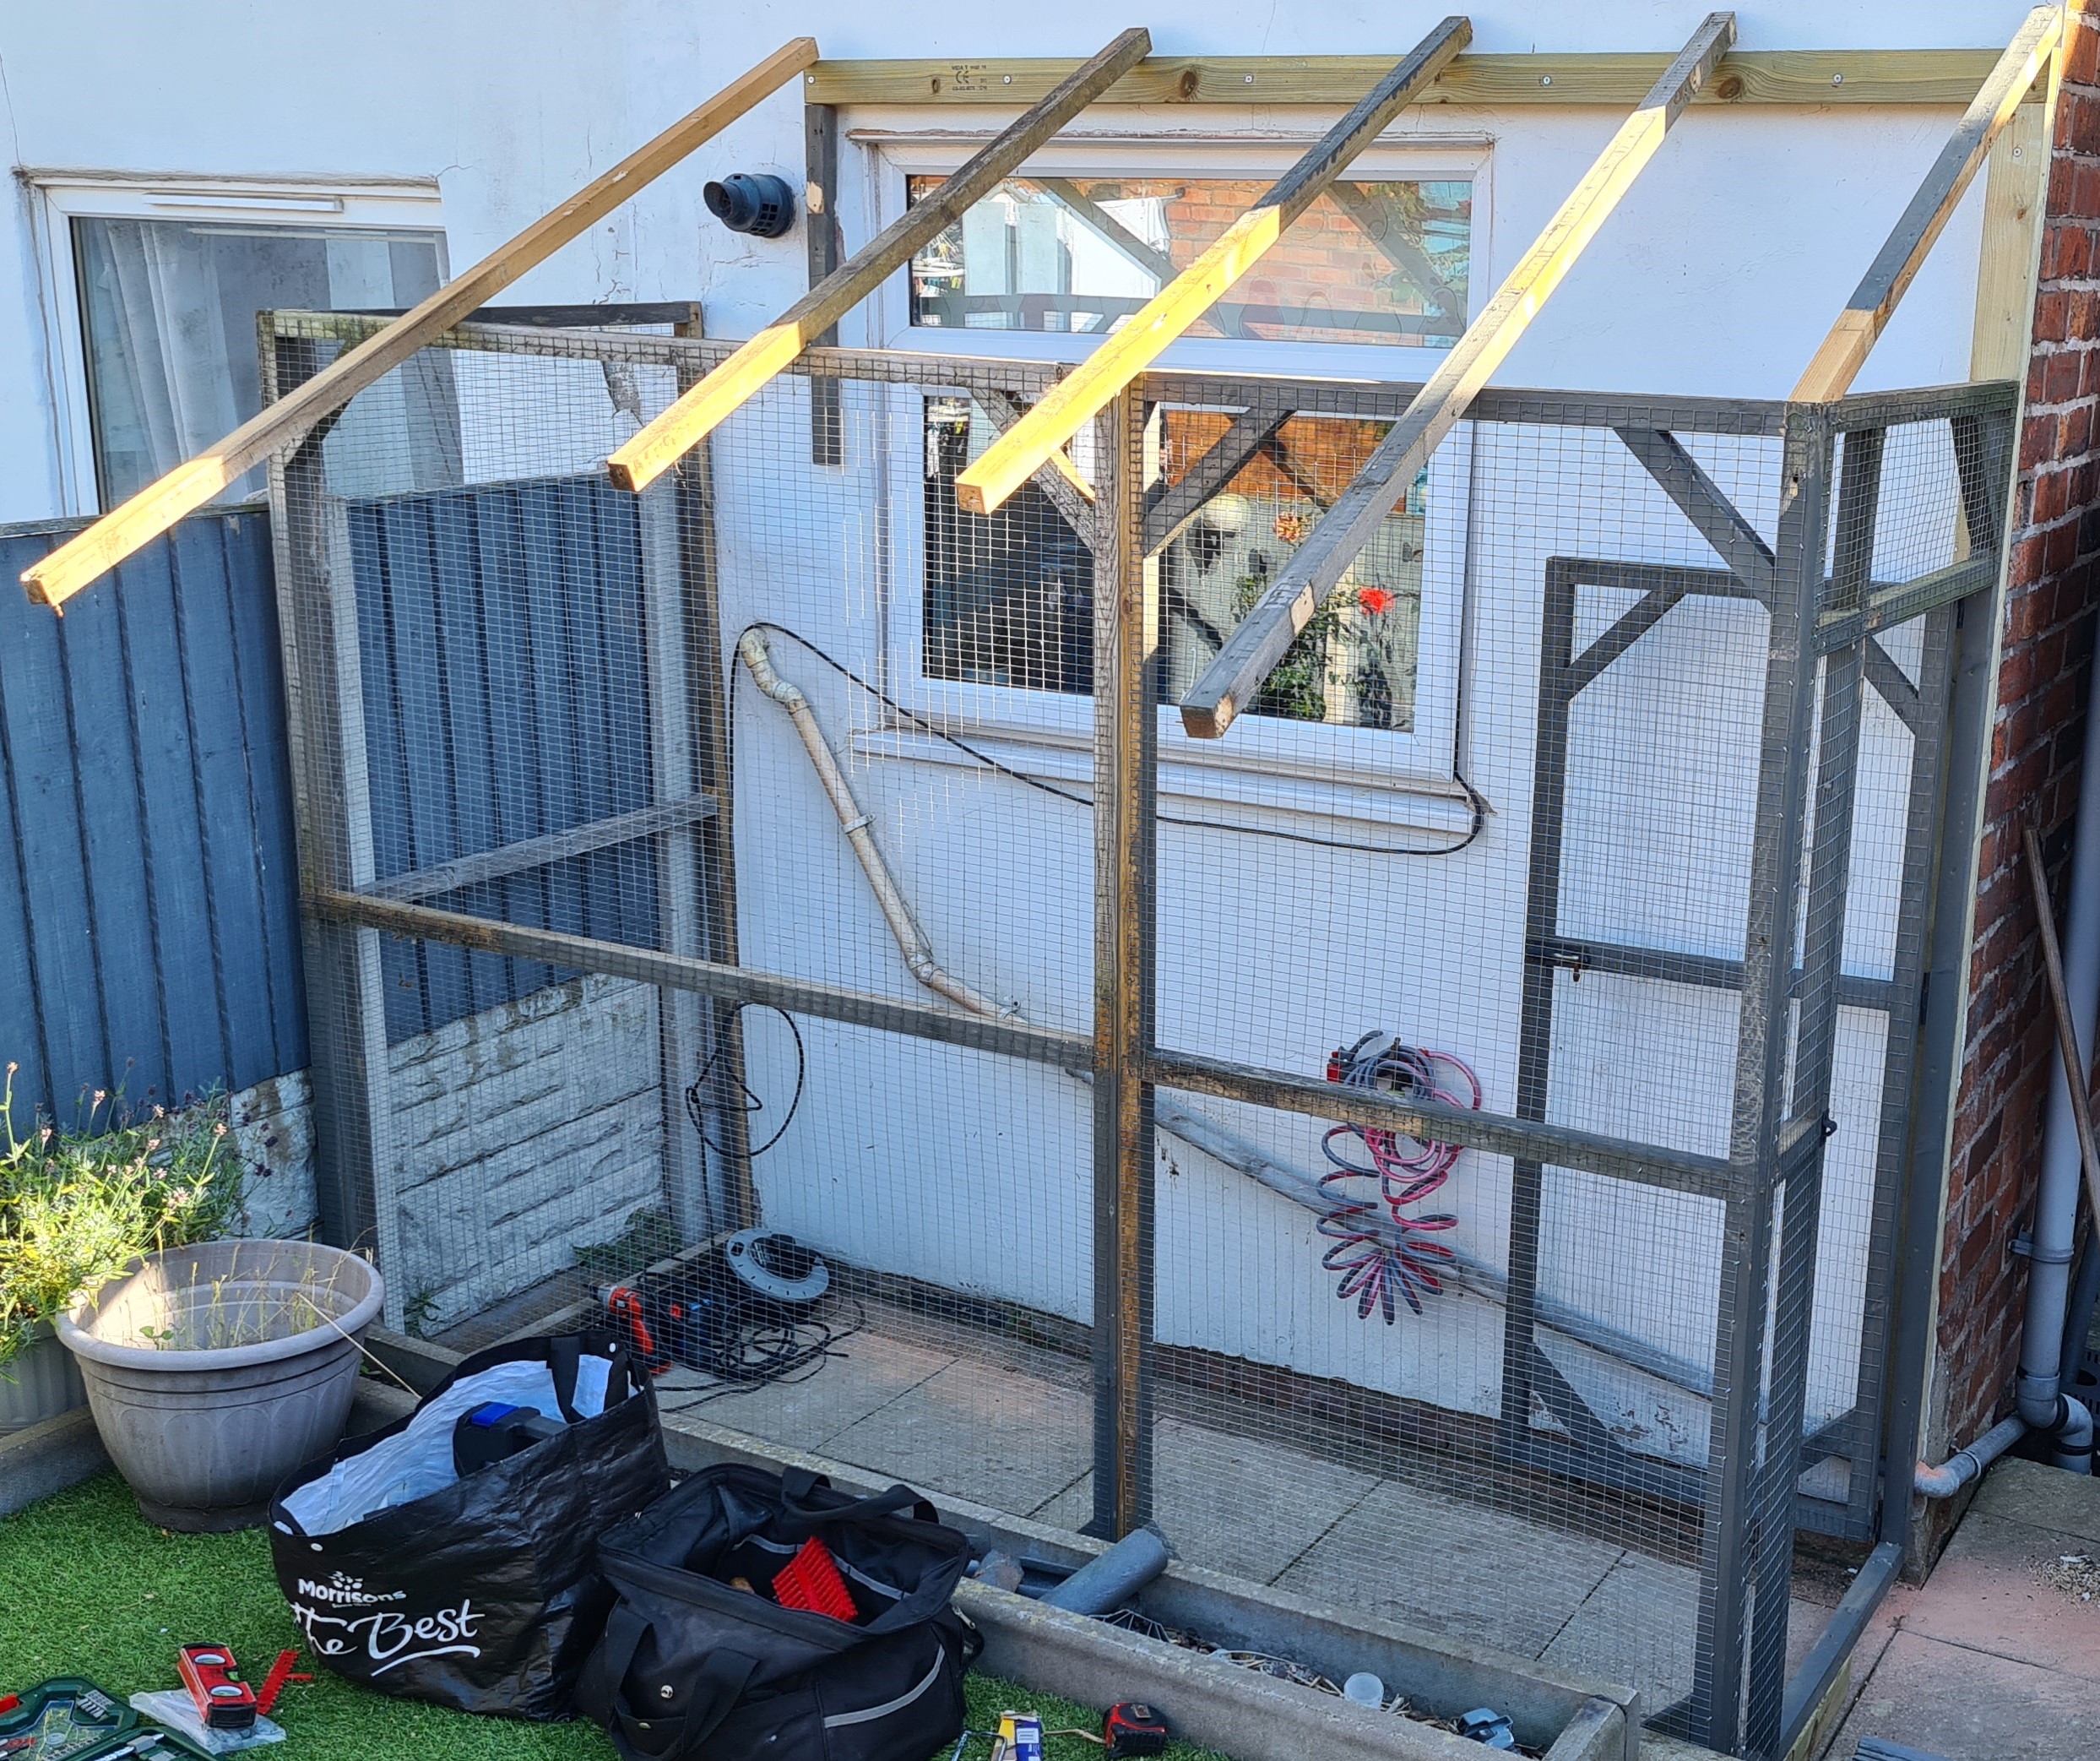 CAFO Complete Another New Catio For Foster Cats